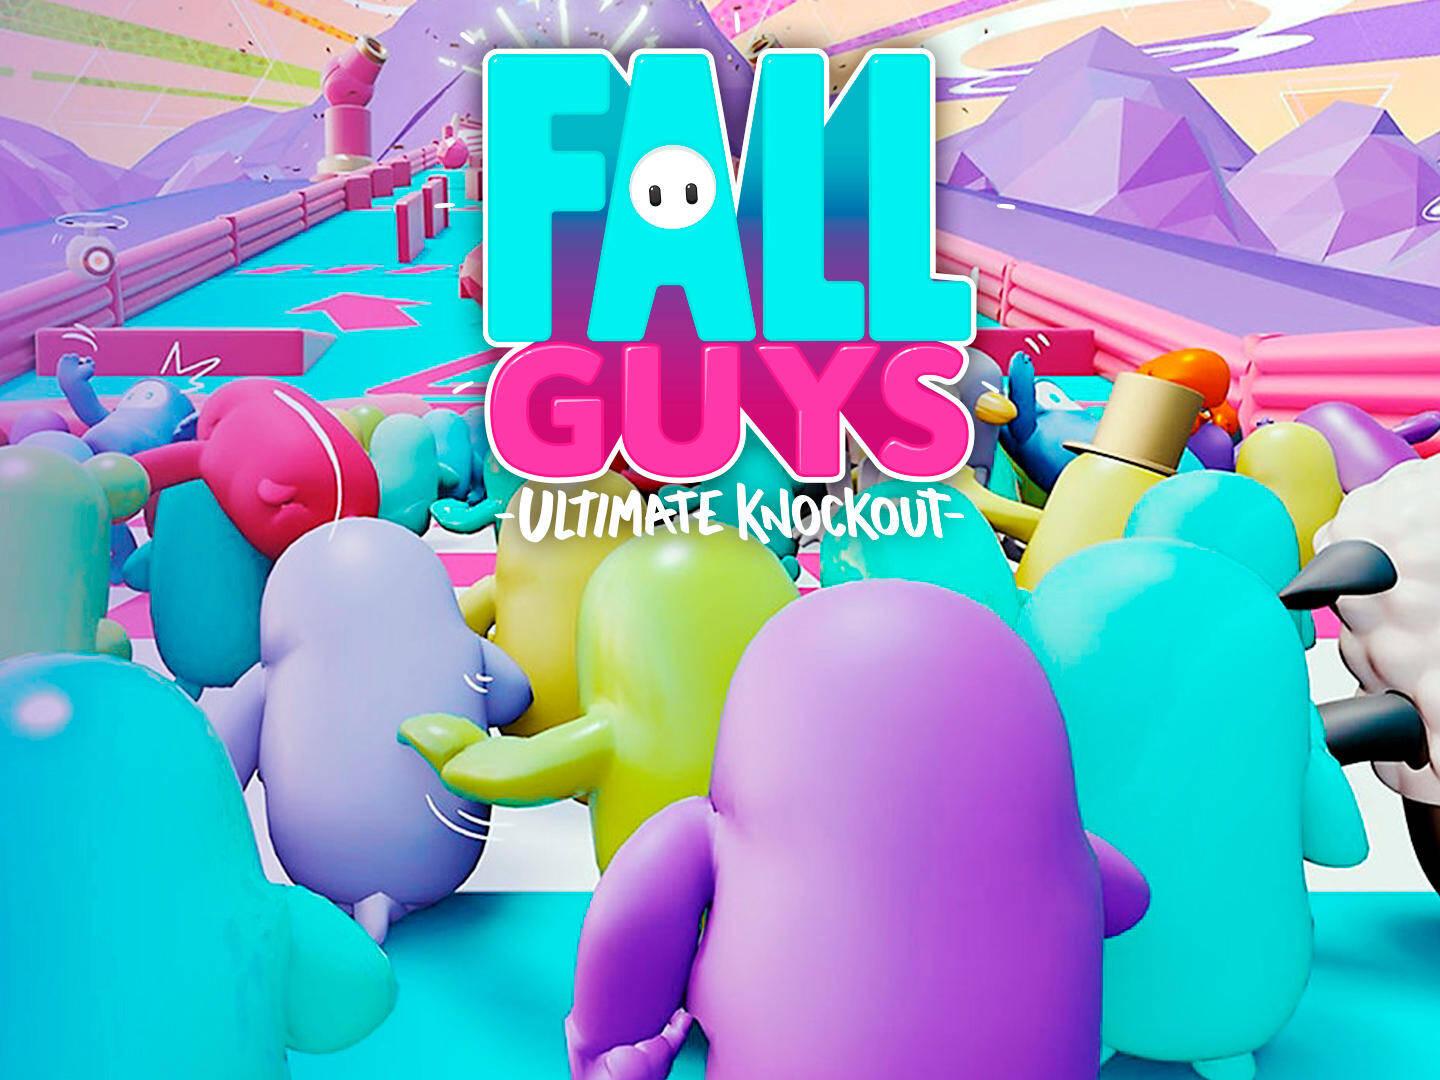 Fall Guys: Ultimate Knockout (for PC) Review